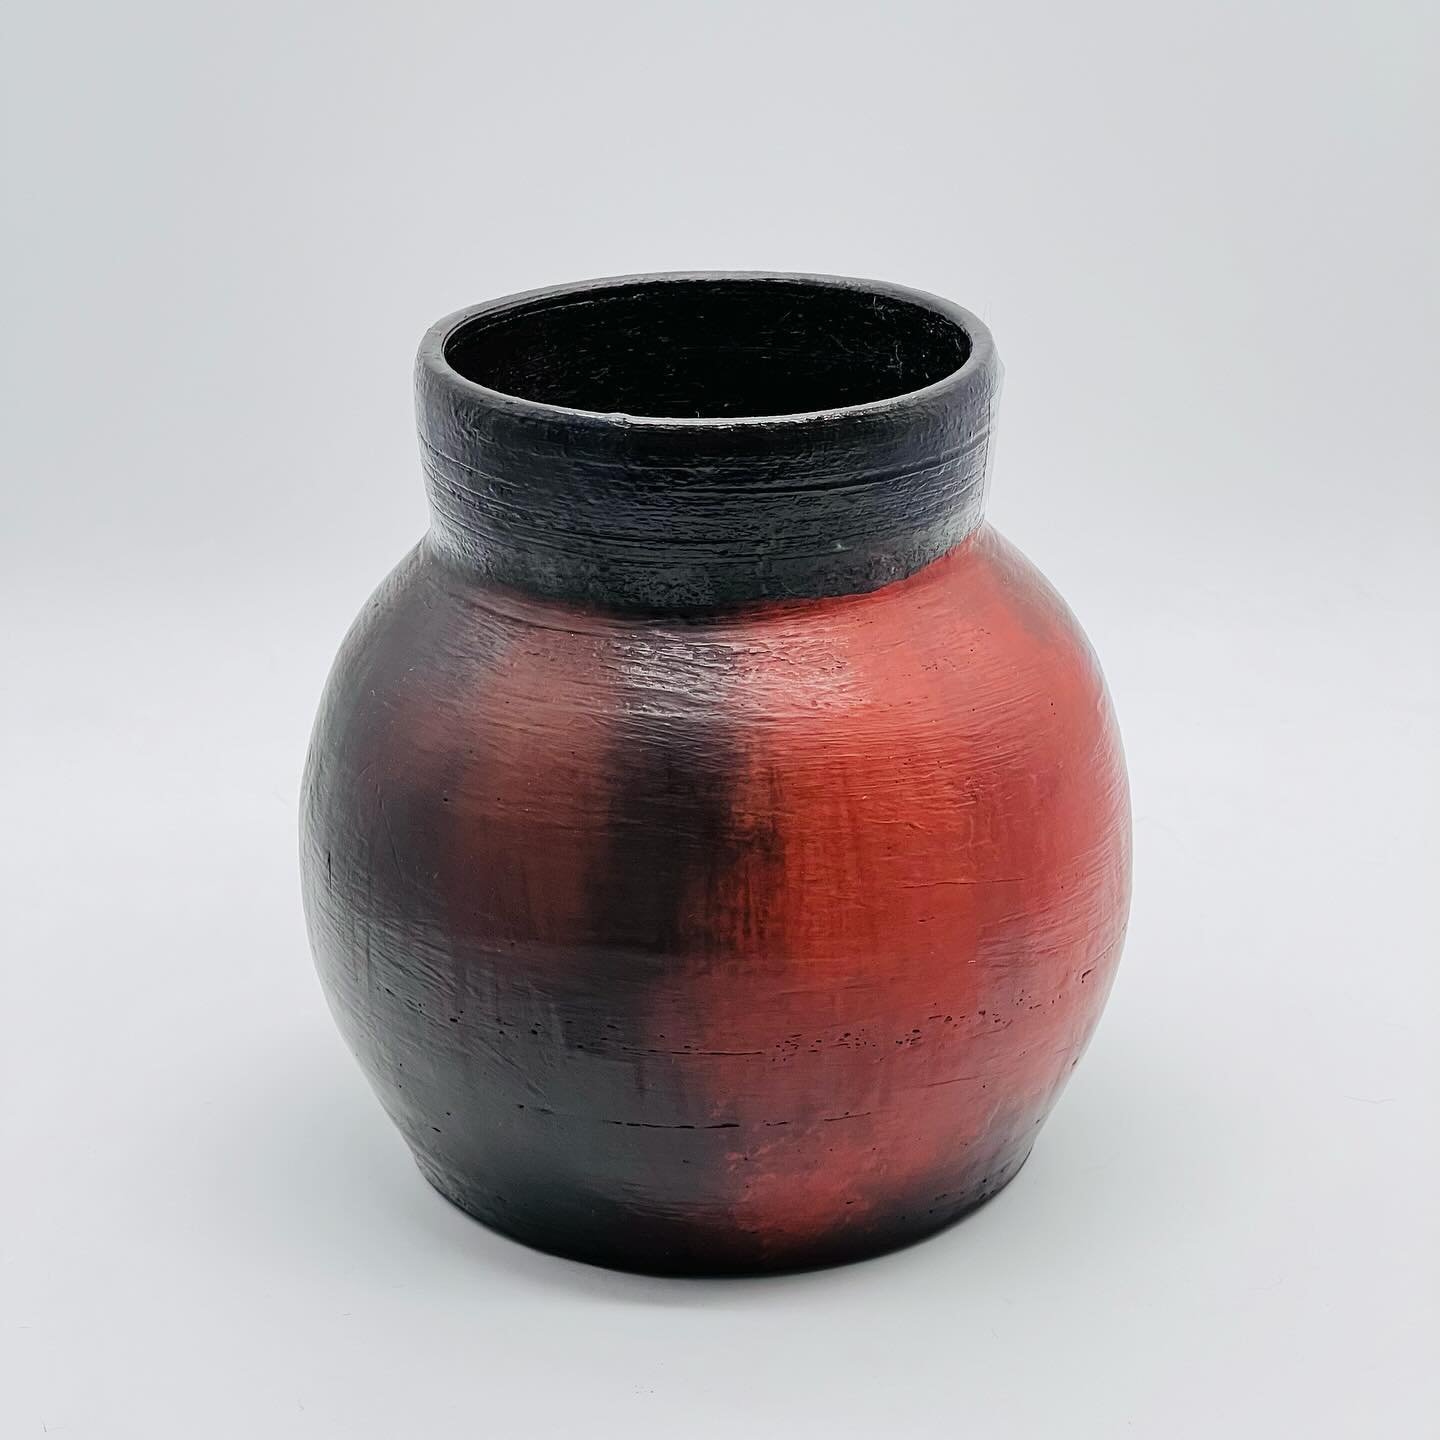 A smoked Raku piece with red slip. This was my first time doing Raku back in 2021, and I was hooked. I love the different shades from deep red to a smokey black on this piece. I held on to this piece for a while and I just decided to let it go into t